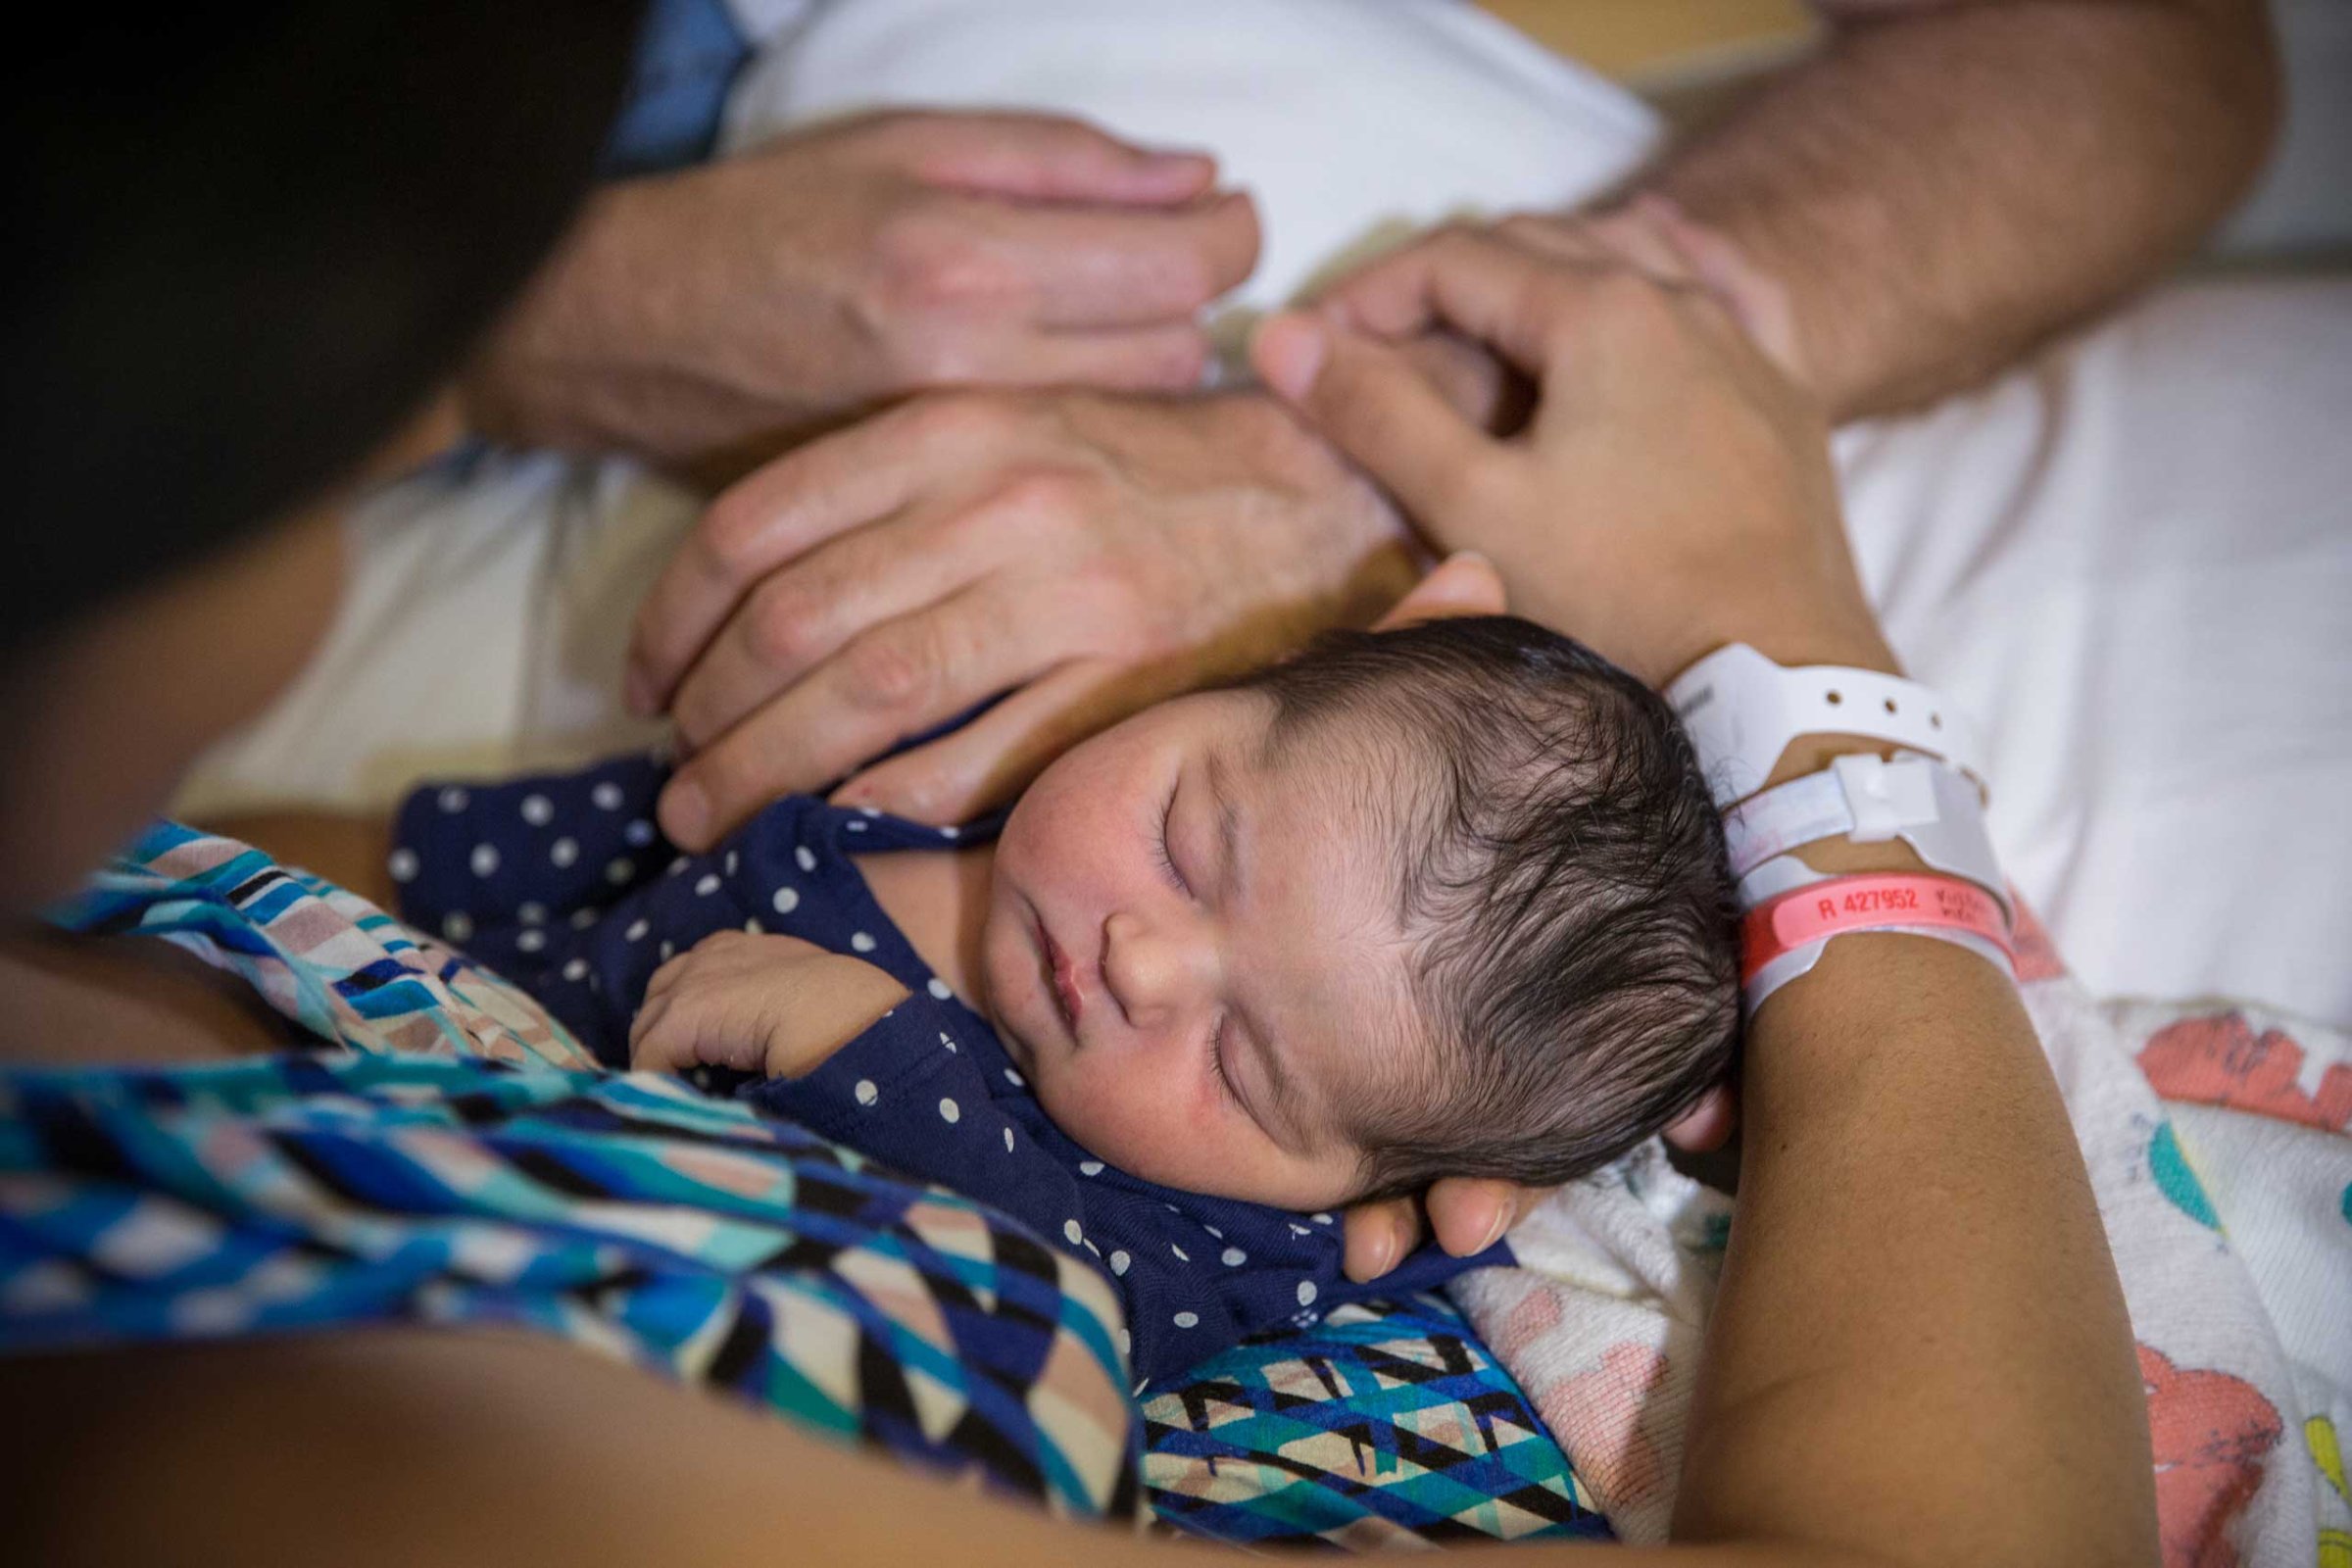 A three-day old baby girl at Shady Grove Adventist Hospital, in Rockville, Maryland, Sept. 5, 2014.